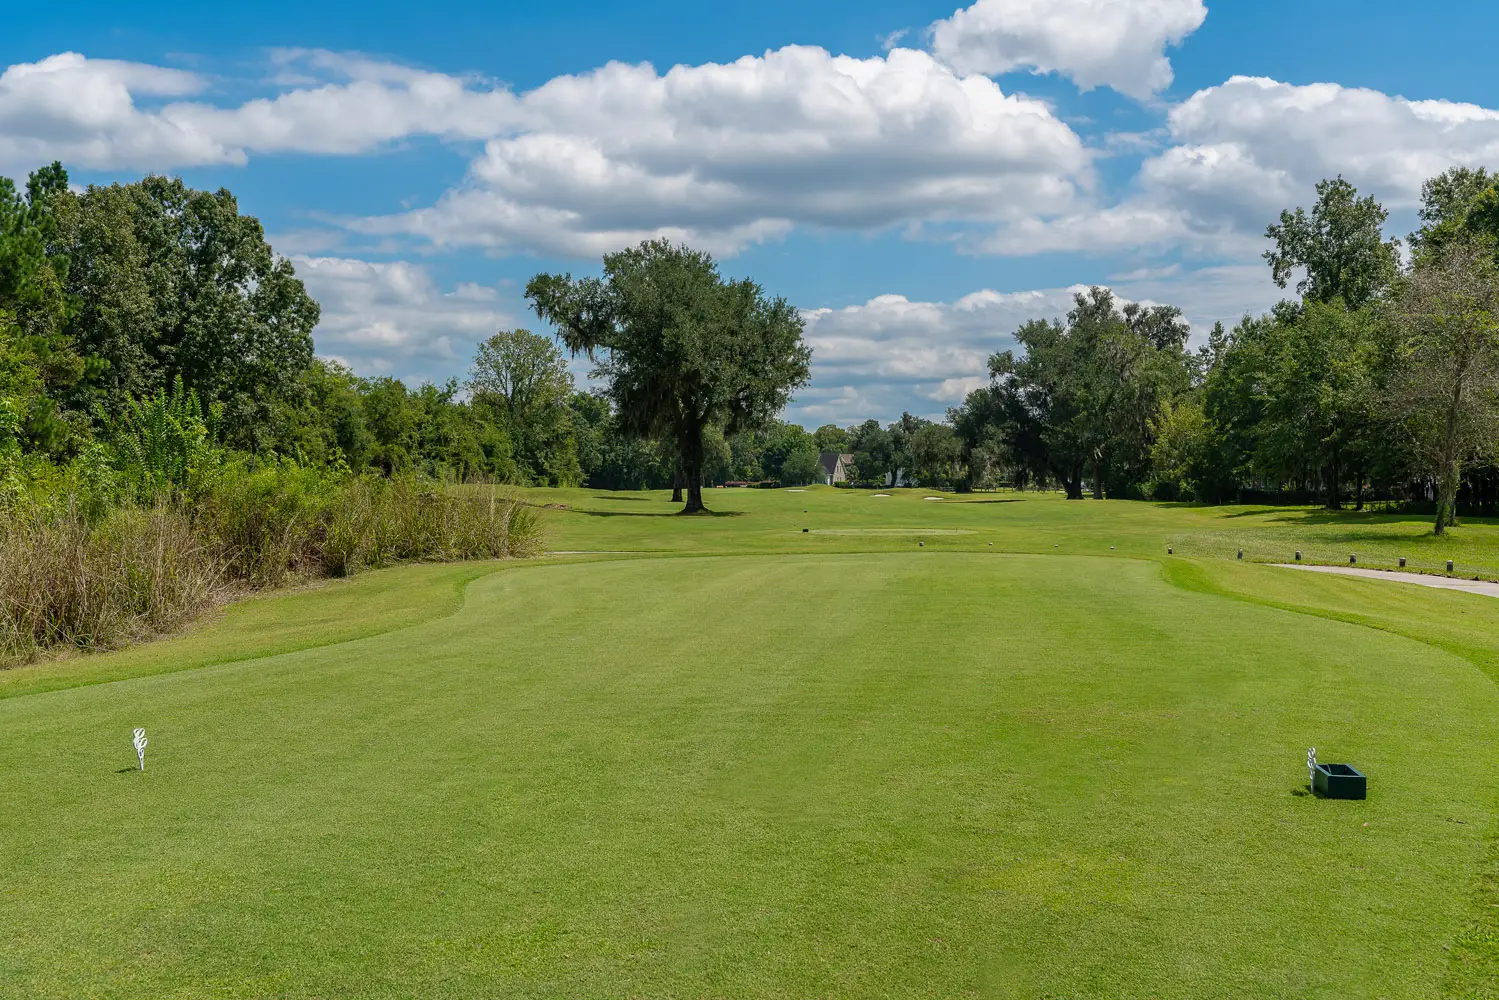 Photo of the long fairway at Coosaw Creek Country Club's golf course located in North Charleston, SC where a  house is for sale by the homeowner.